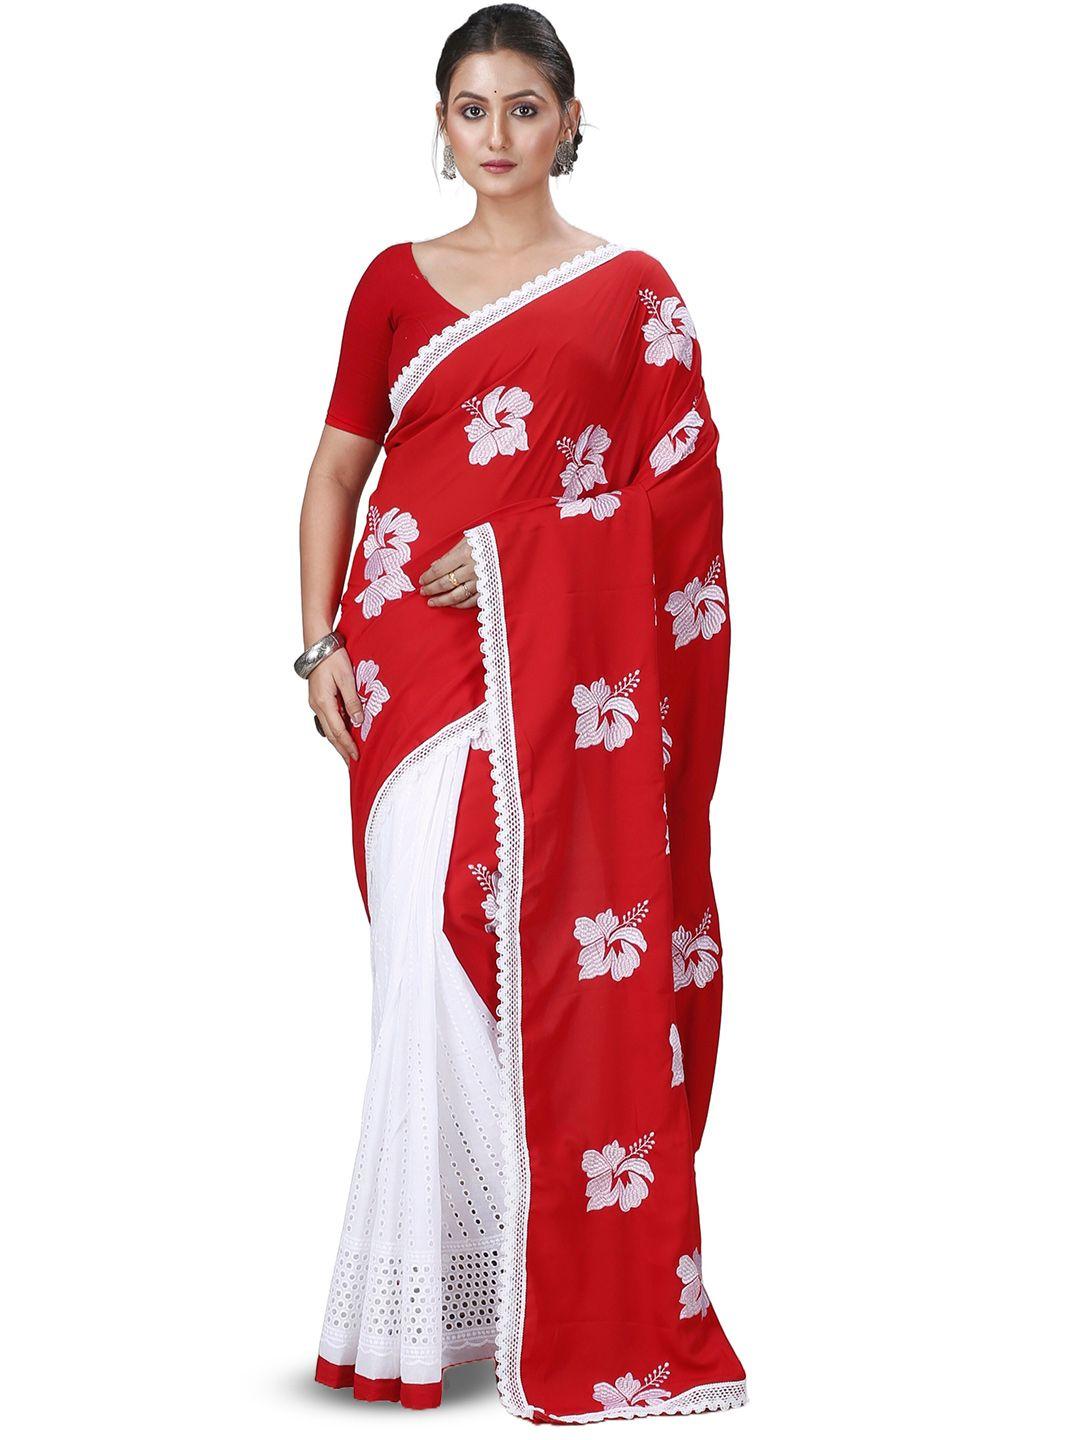 pujoy floral embroidered cotton half and half taant saree